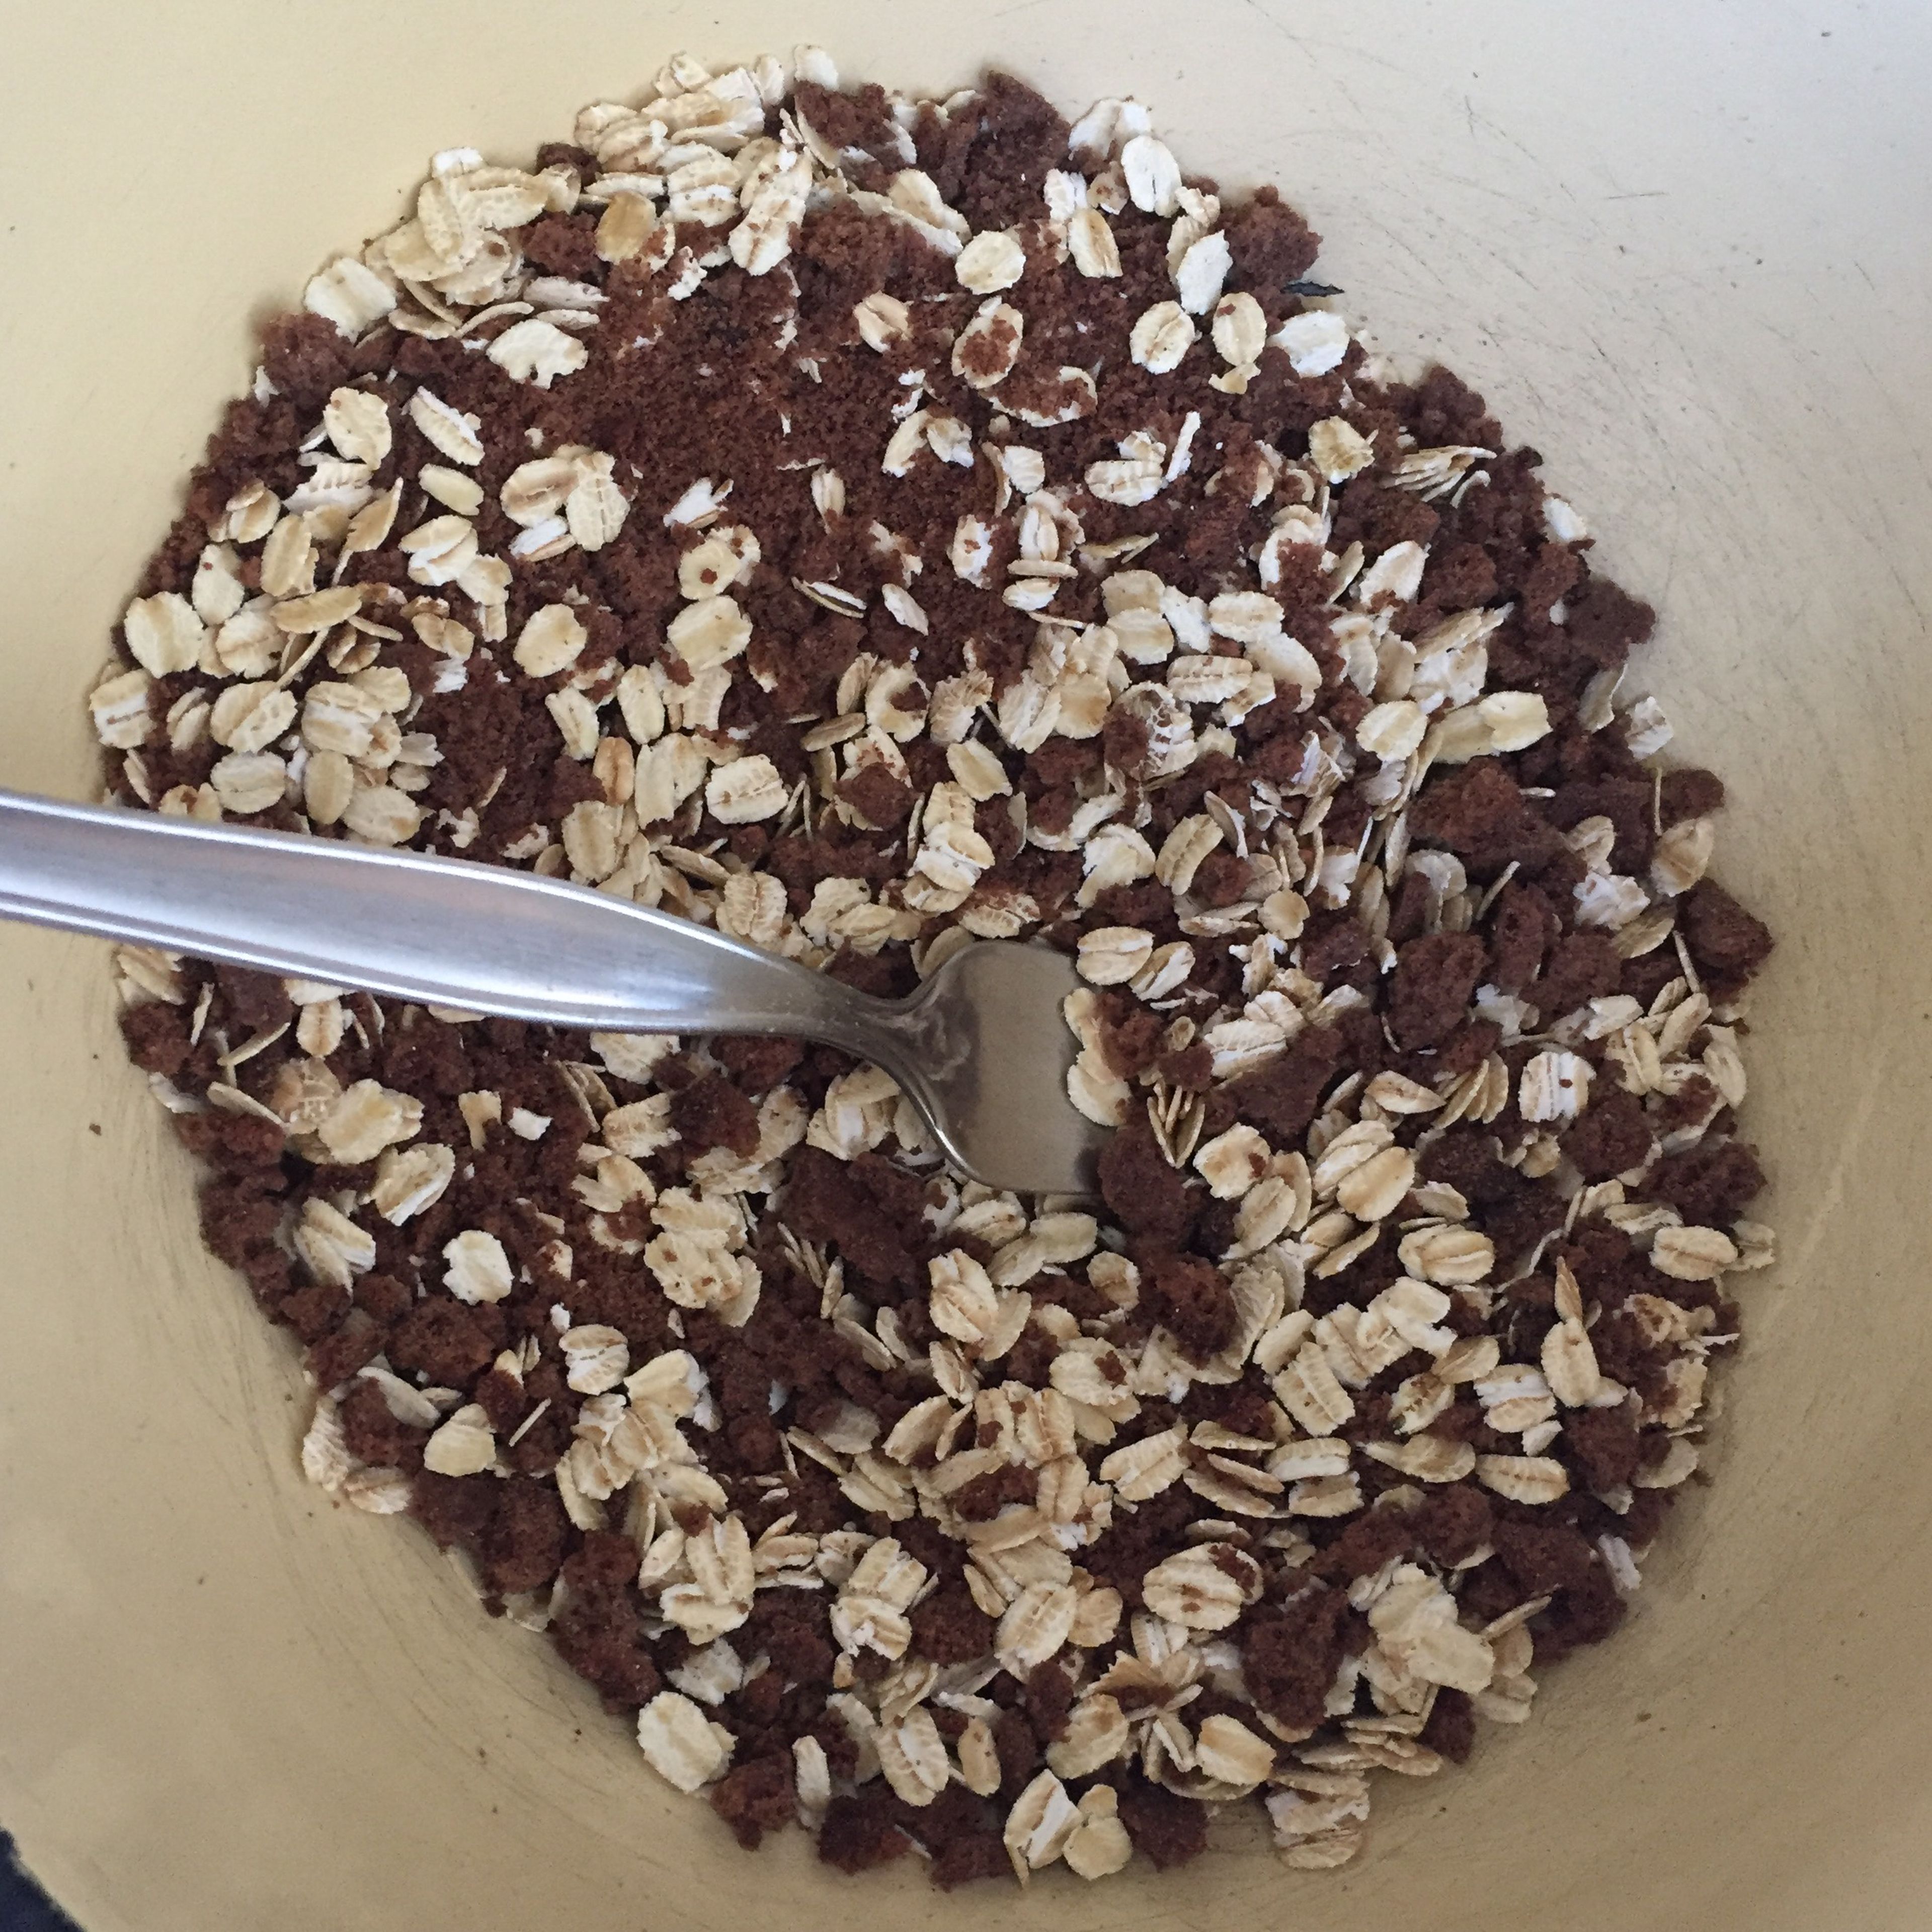 Once the brownies are crumbled, add the half cup of oats to the bowl, and stir to combine.